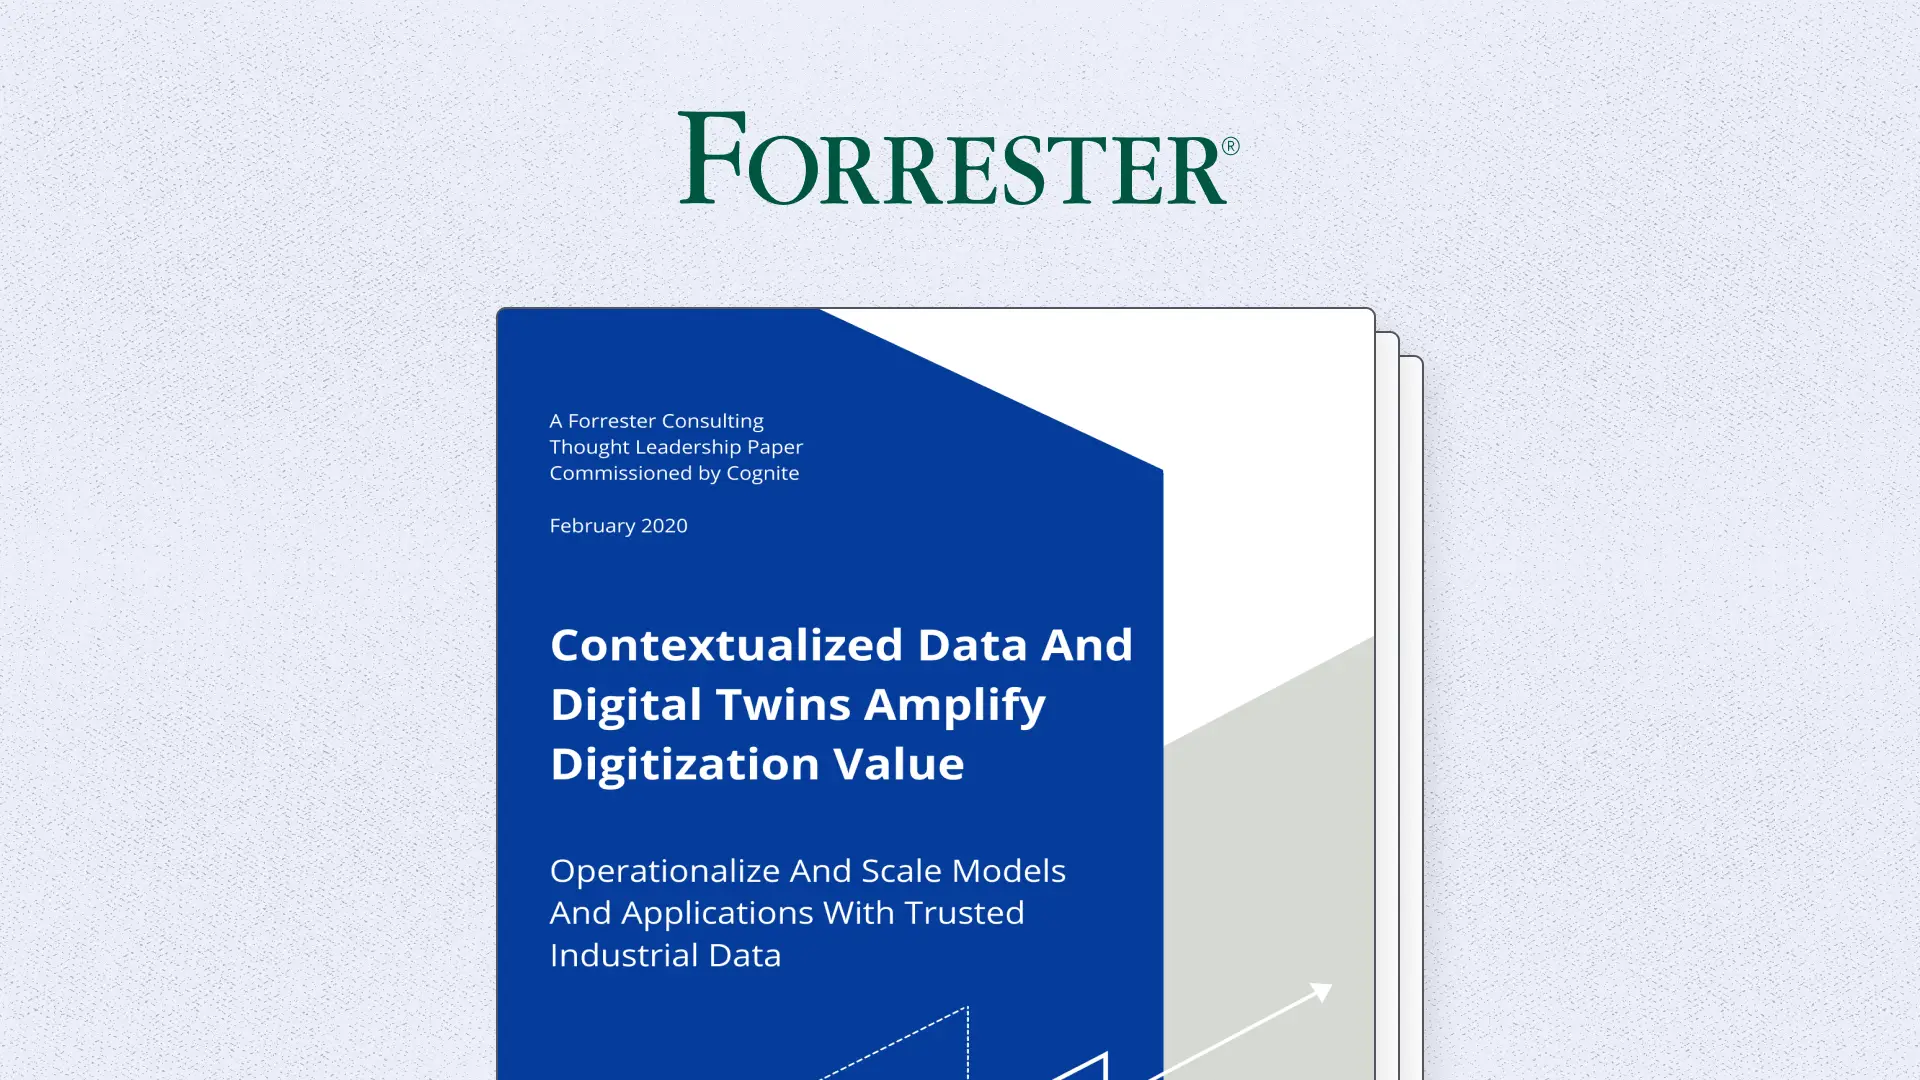 contextualized-data-and-digital-twins-amplify-digitization-value-thumbnail